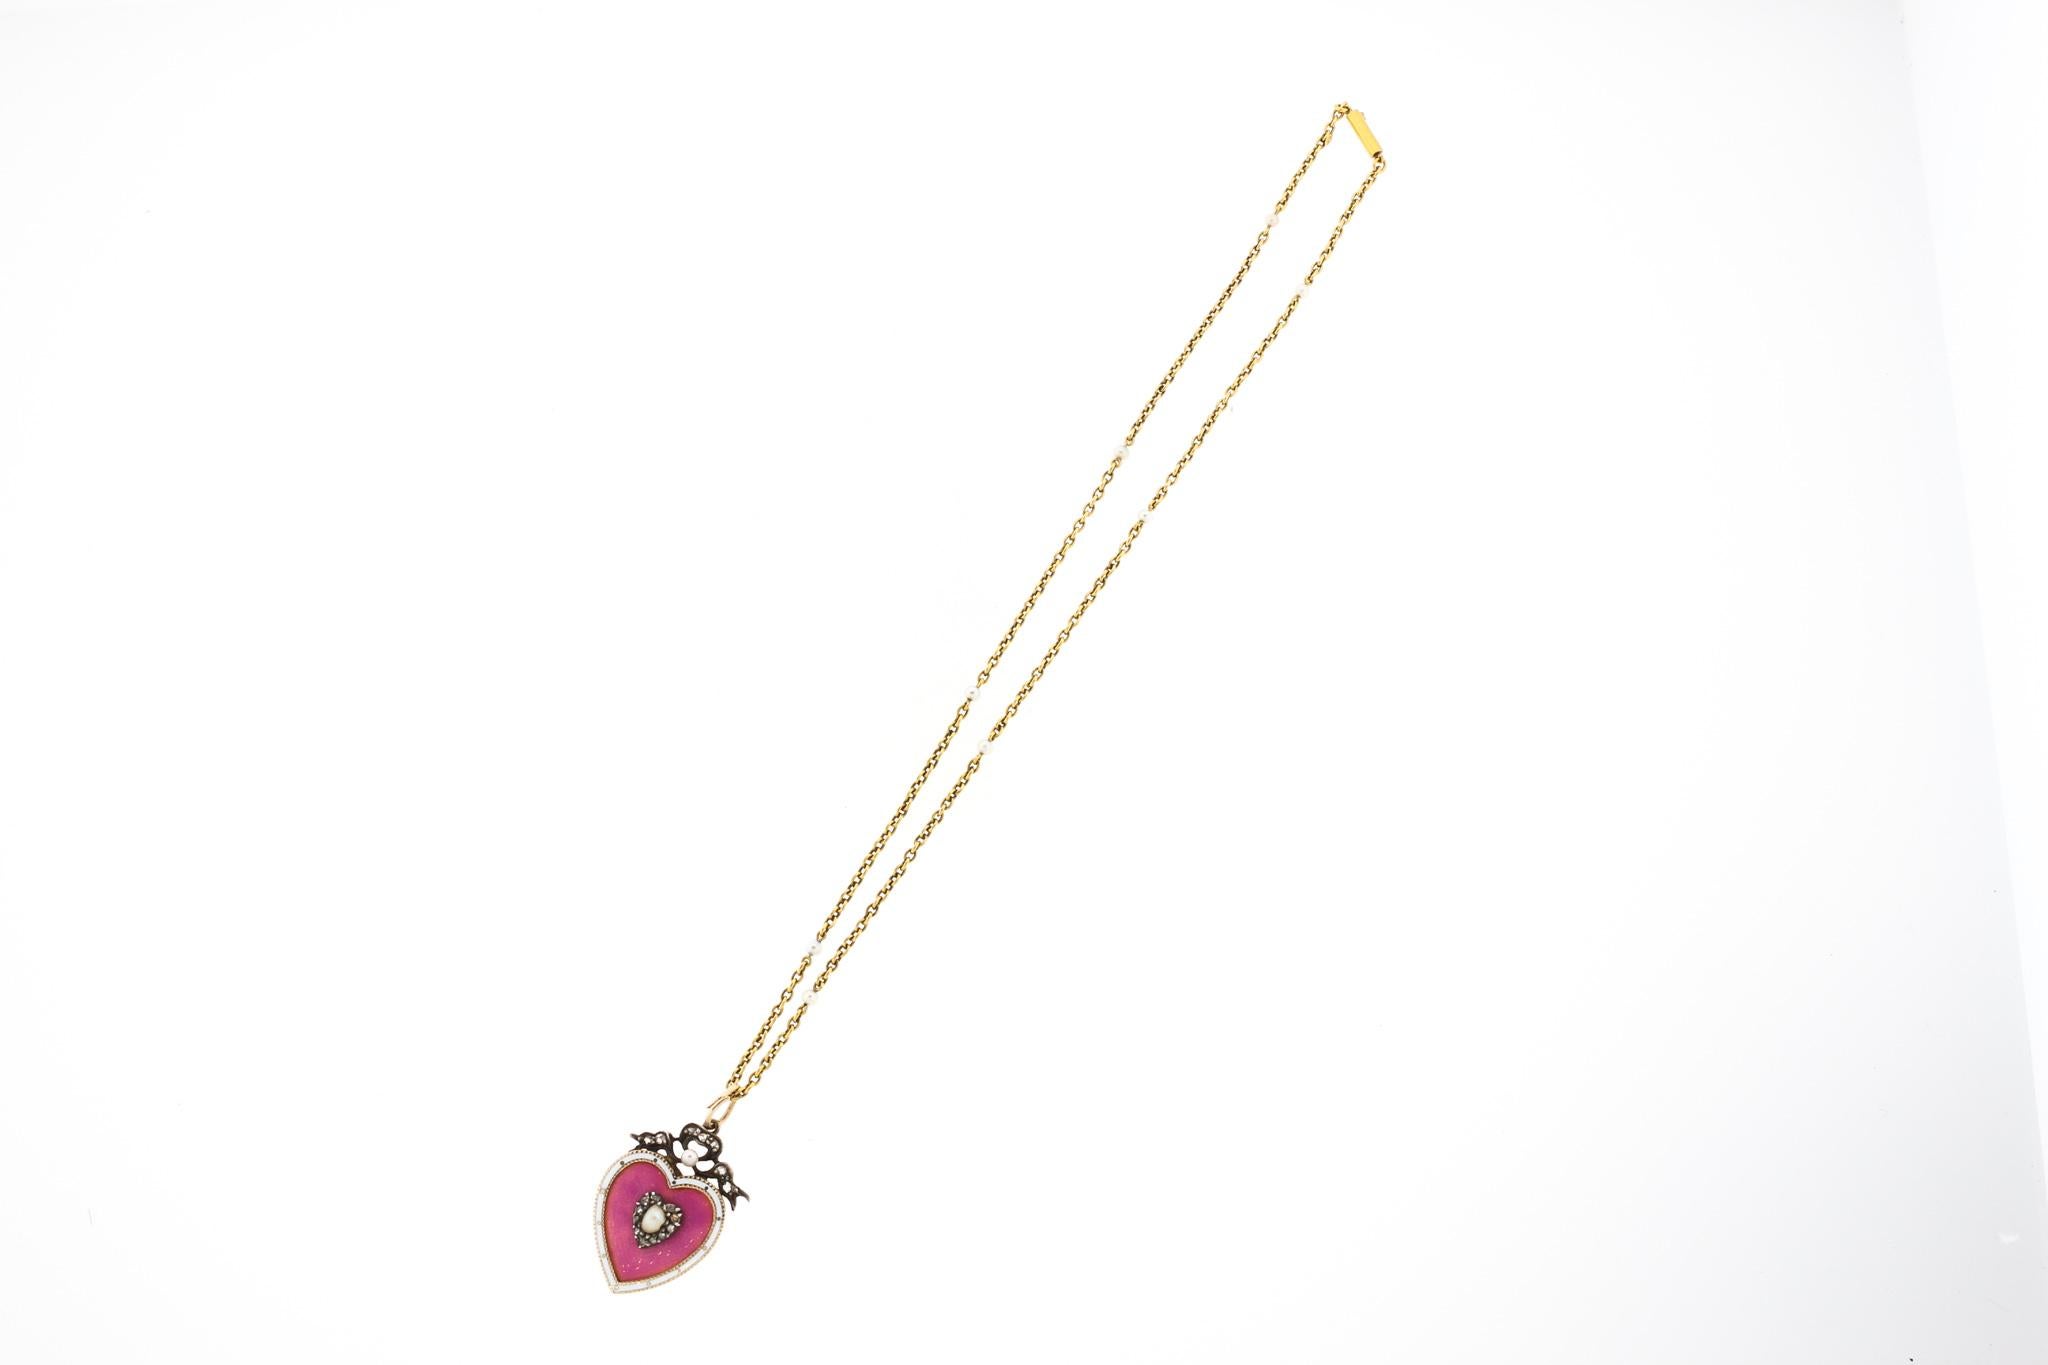 Antique Victorian pink enamel heart pendant suspended from its original 15k gold chain with small seed pearls, circa 1880. This necklace is such a sweet jewel, especially hanging from its original antique chain. It was likely made in England. The